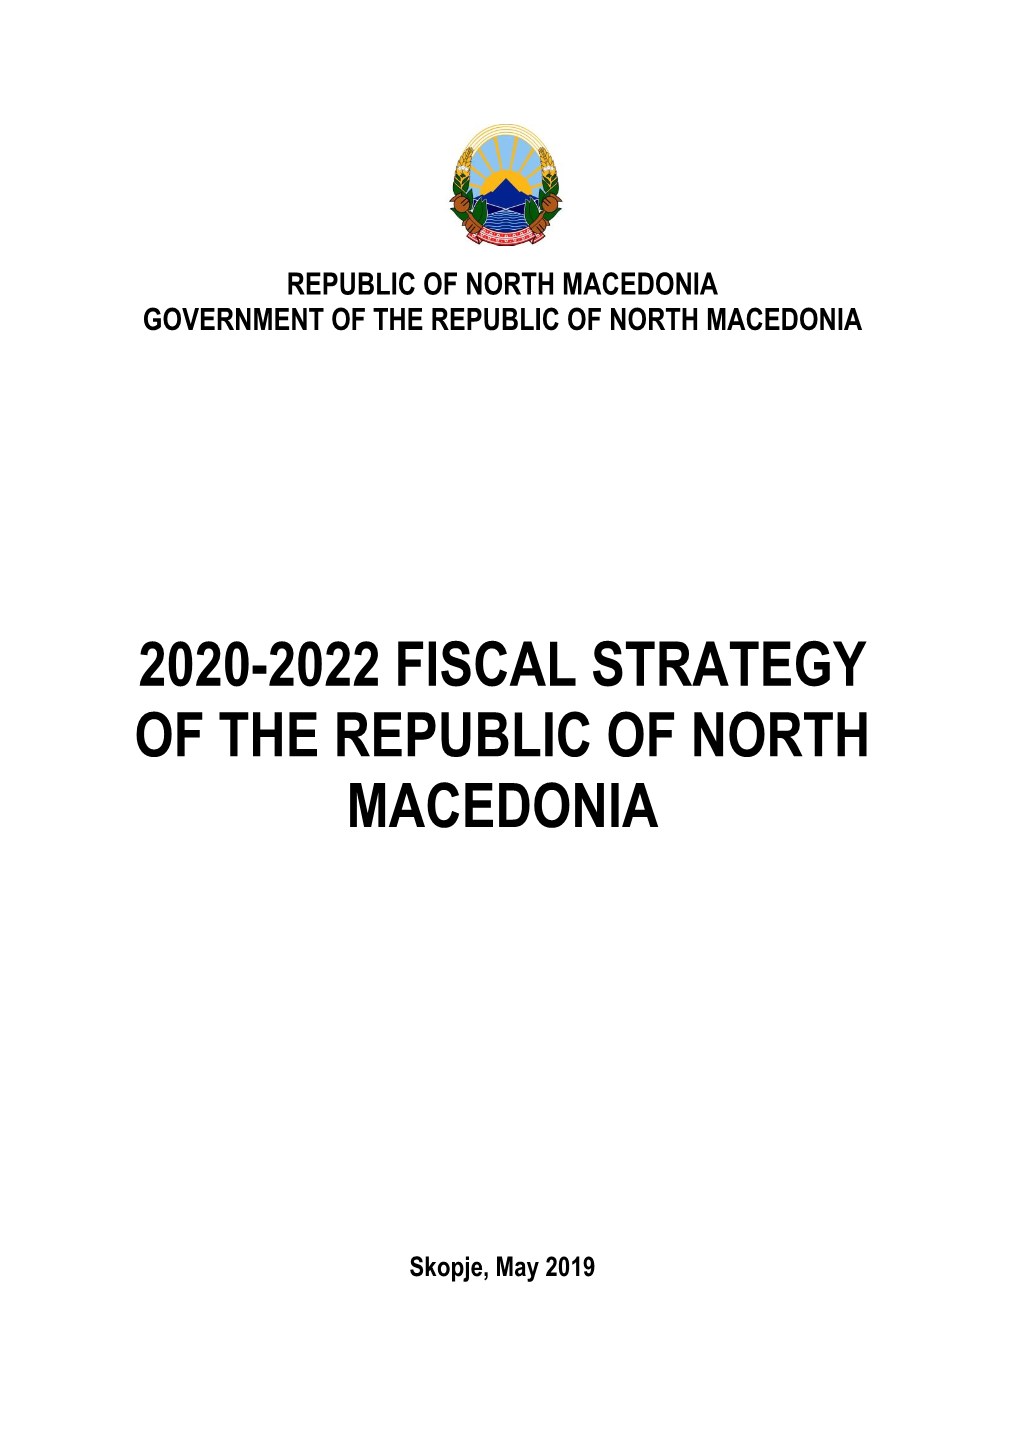 Fiscal Strategy of the Republic of North Macedonia 2020